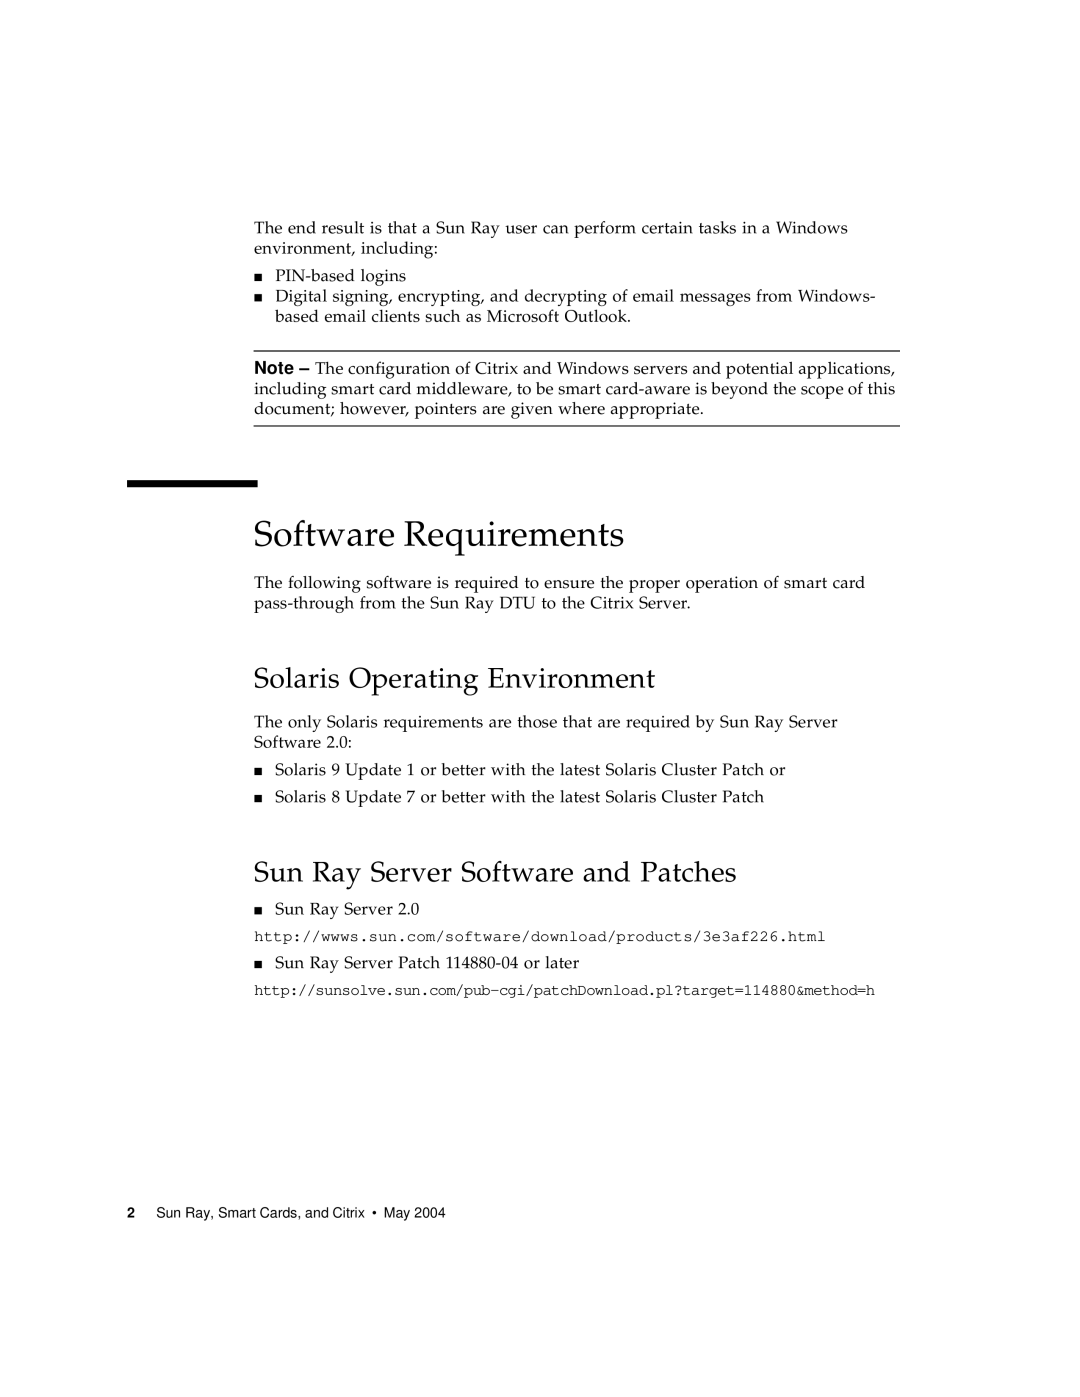 Sun Microsystems and Citrix Software Requirements, Solaris Operating Environment, Sun Ray Server Software and Patches 